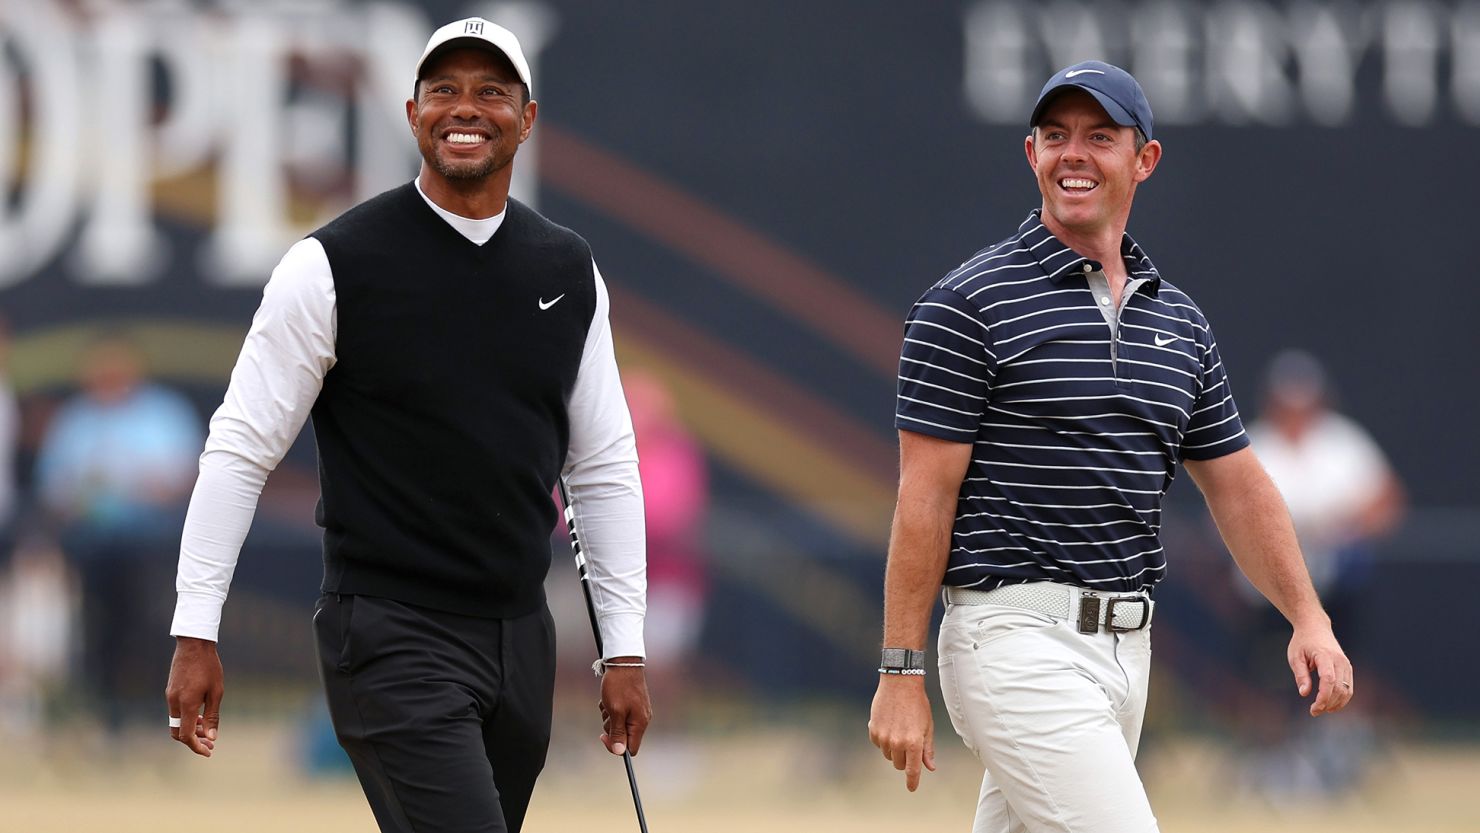 Tiger Woods of The USA and Rory McIlroy of Northern Ireland on the 18th fairway  during the Celebration of Champions prior to The 150th Open at St Andrews Old Course on July 11, 2022 in St Andrews, Scotland.